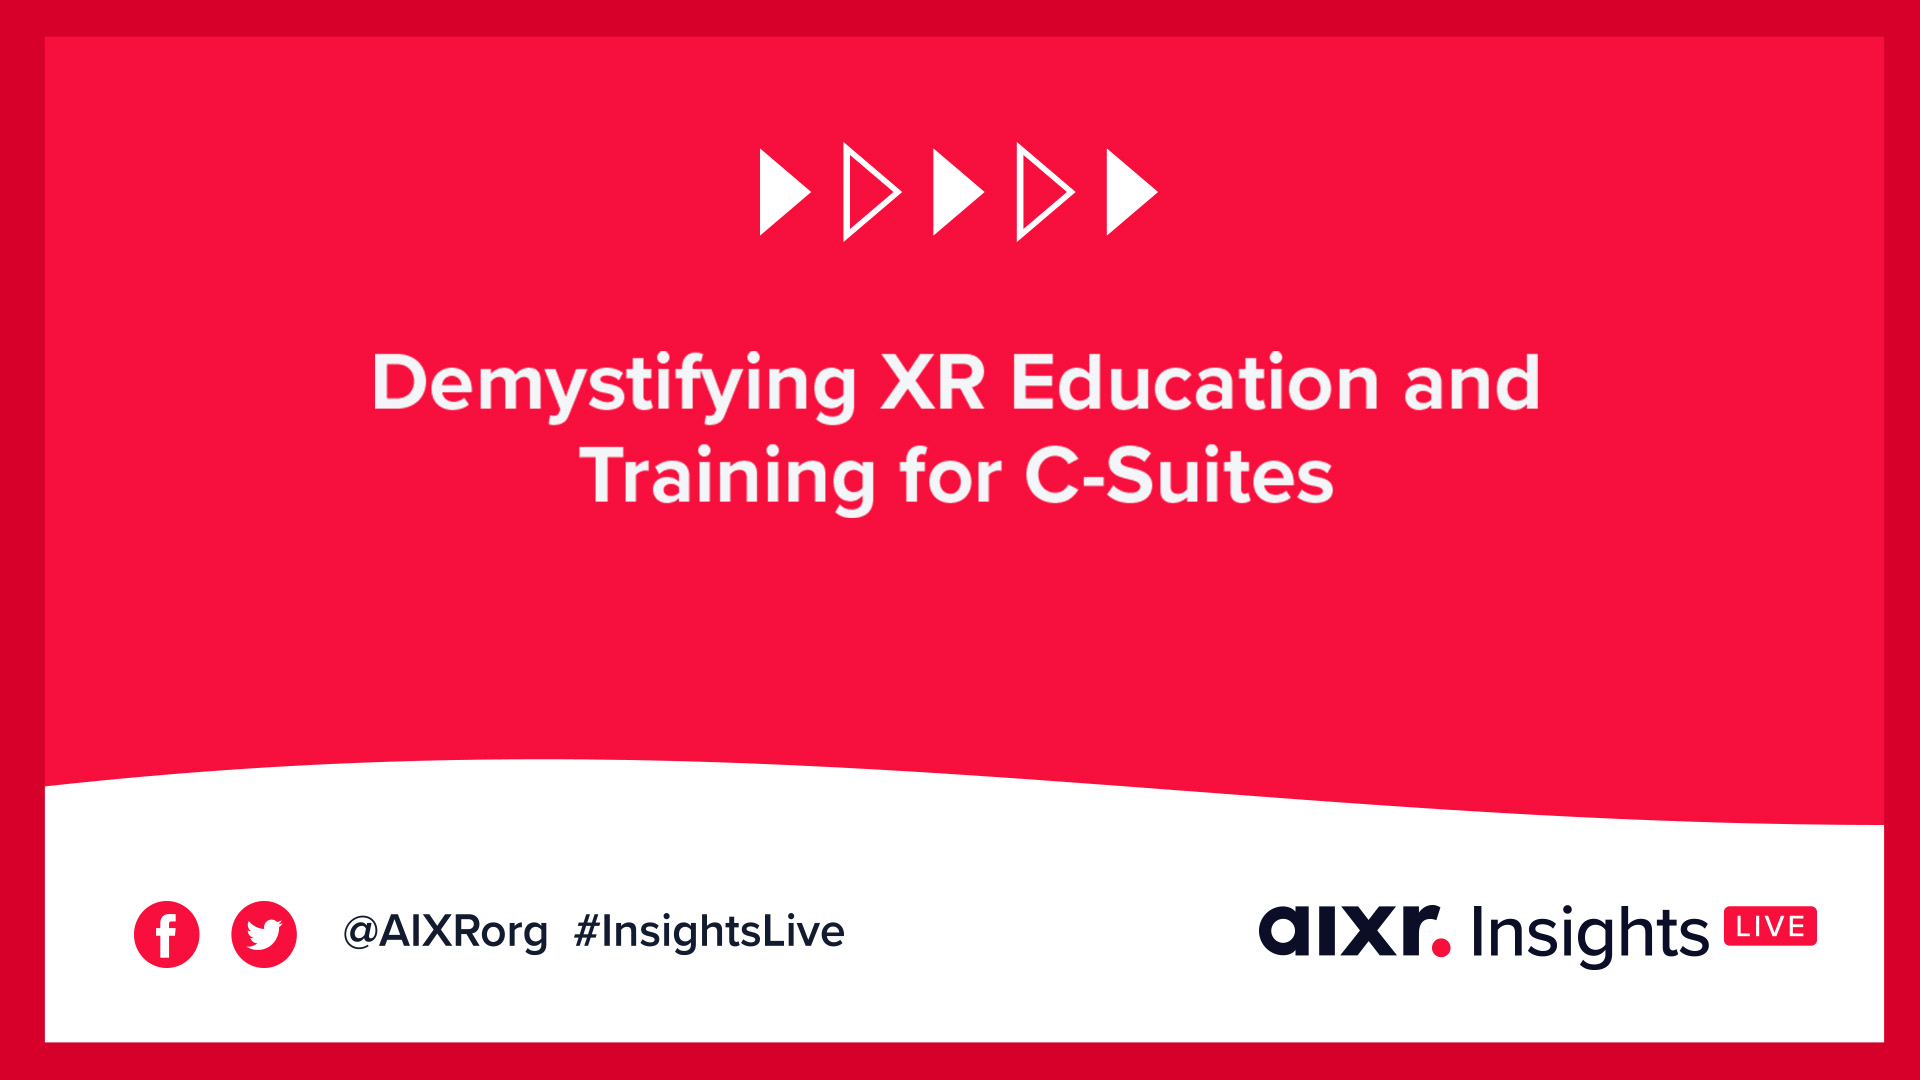 Demystifying XR Education and Training for C-Suites